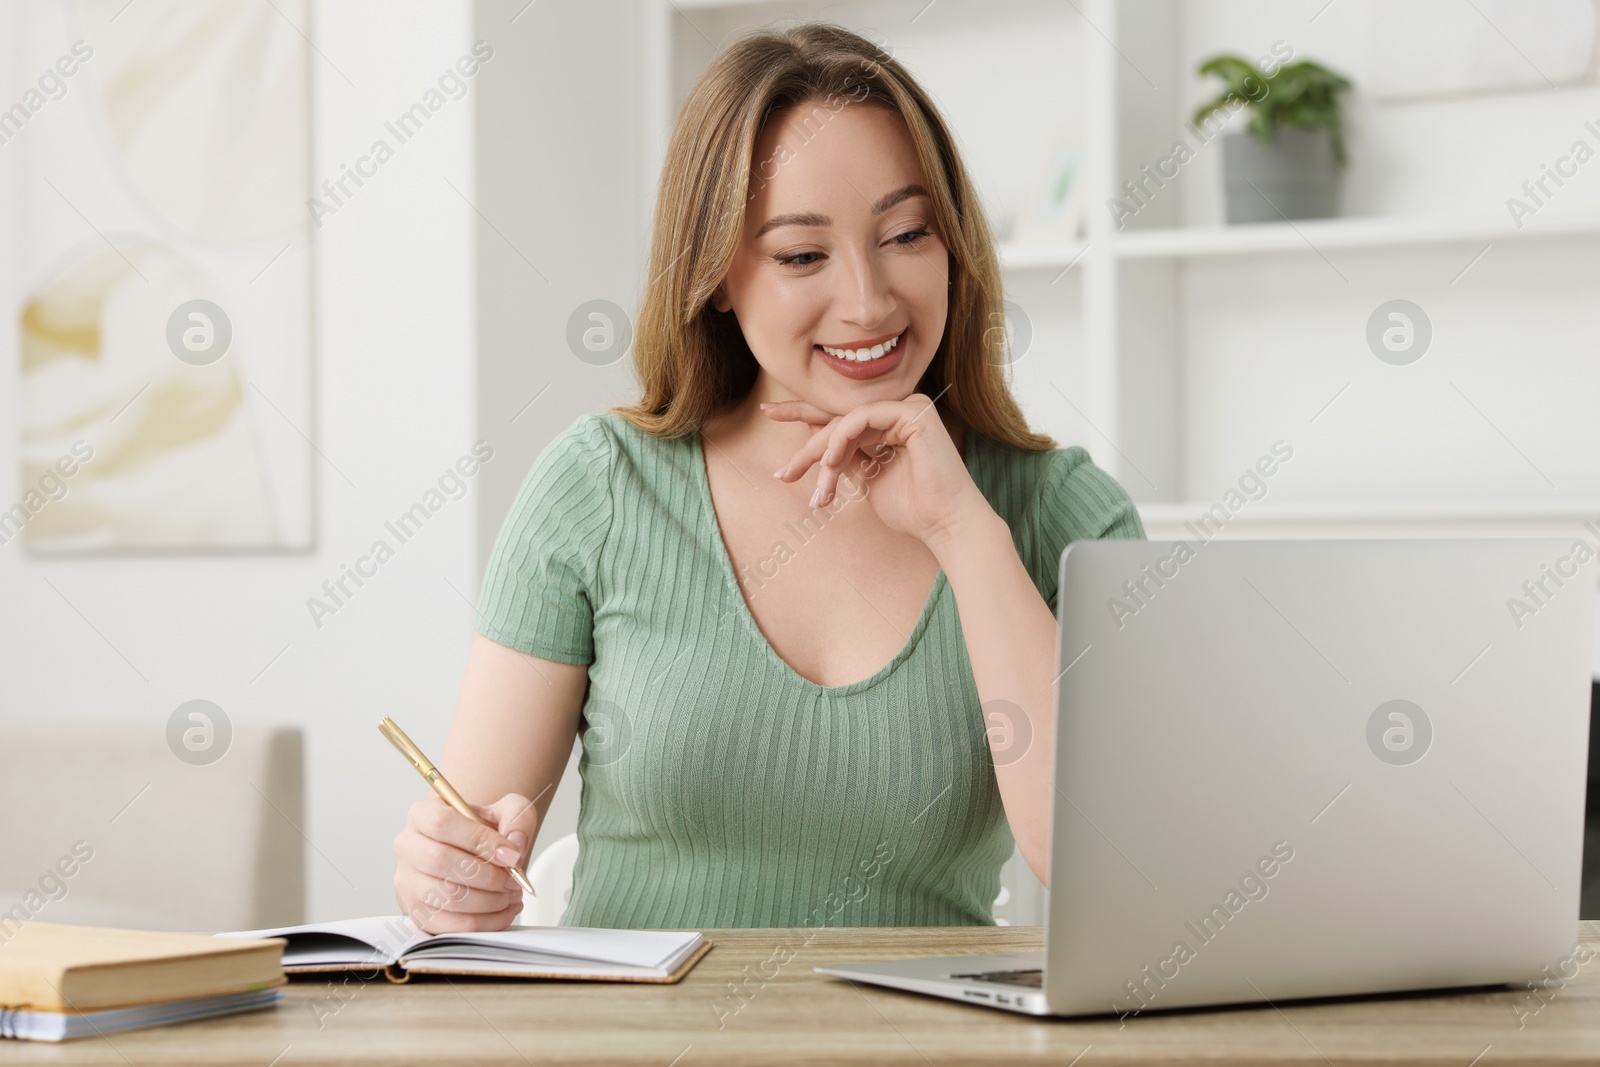 Photo of Young woman having video chat via laptop at wooden table indoors